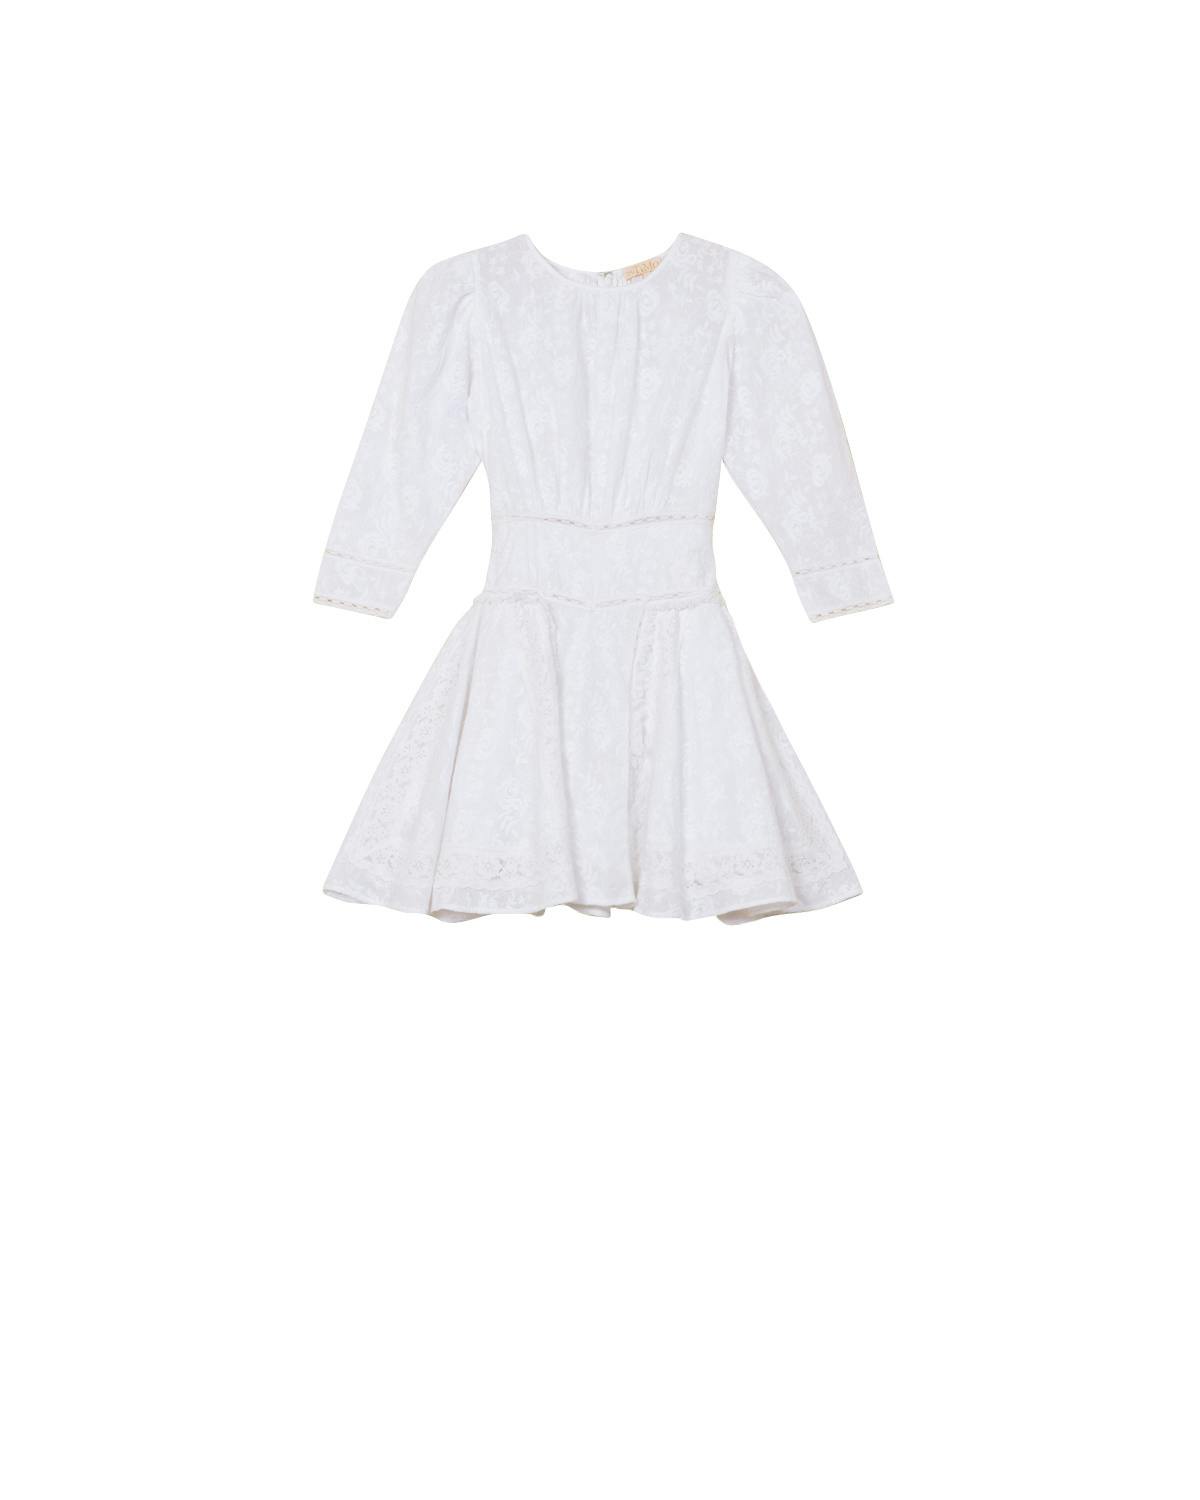 Broderie Anglaise Mini Dress, White. Image #6